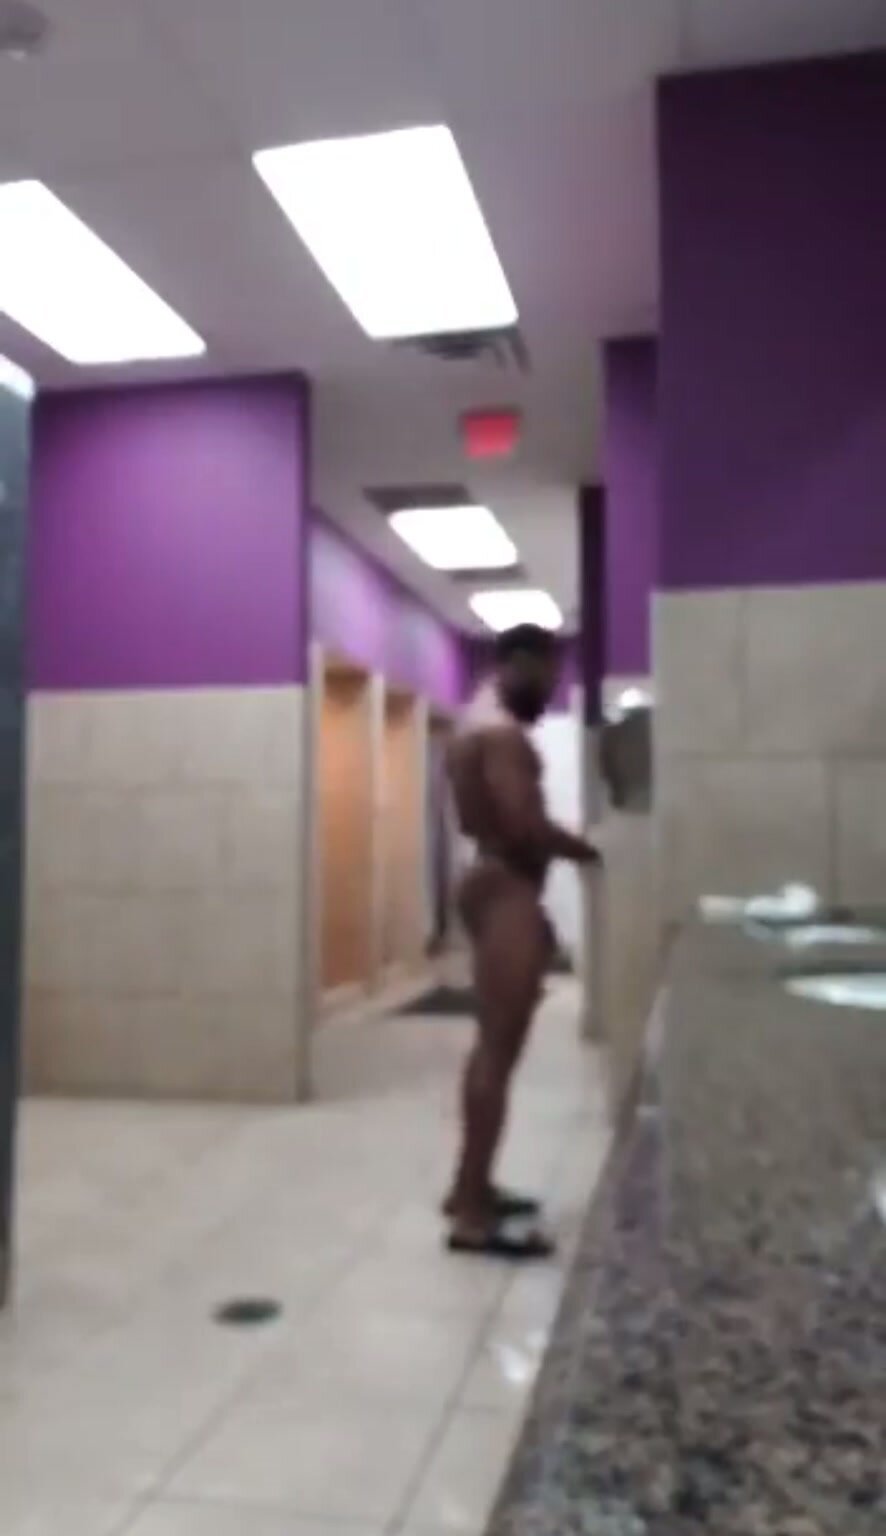 Naked and showing off in gym lockerroom